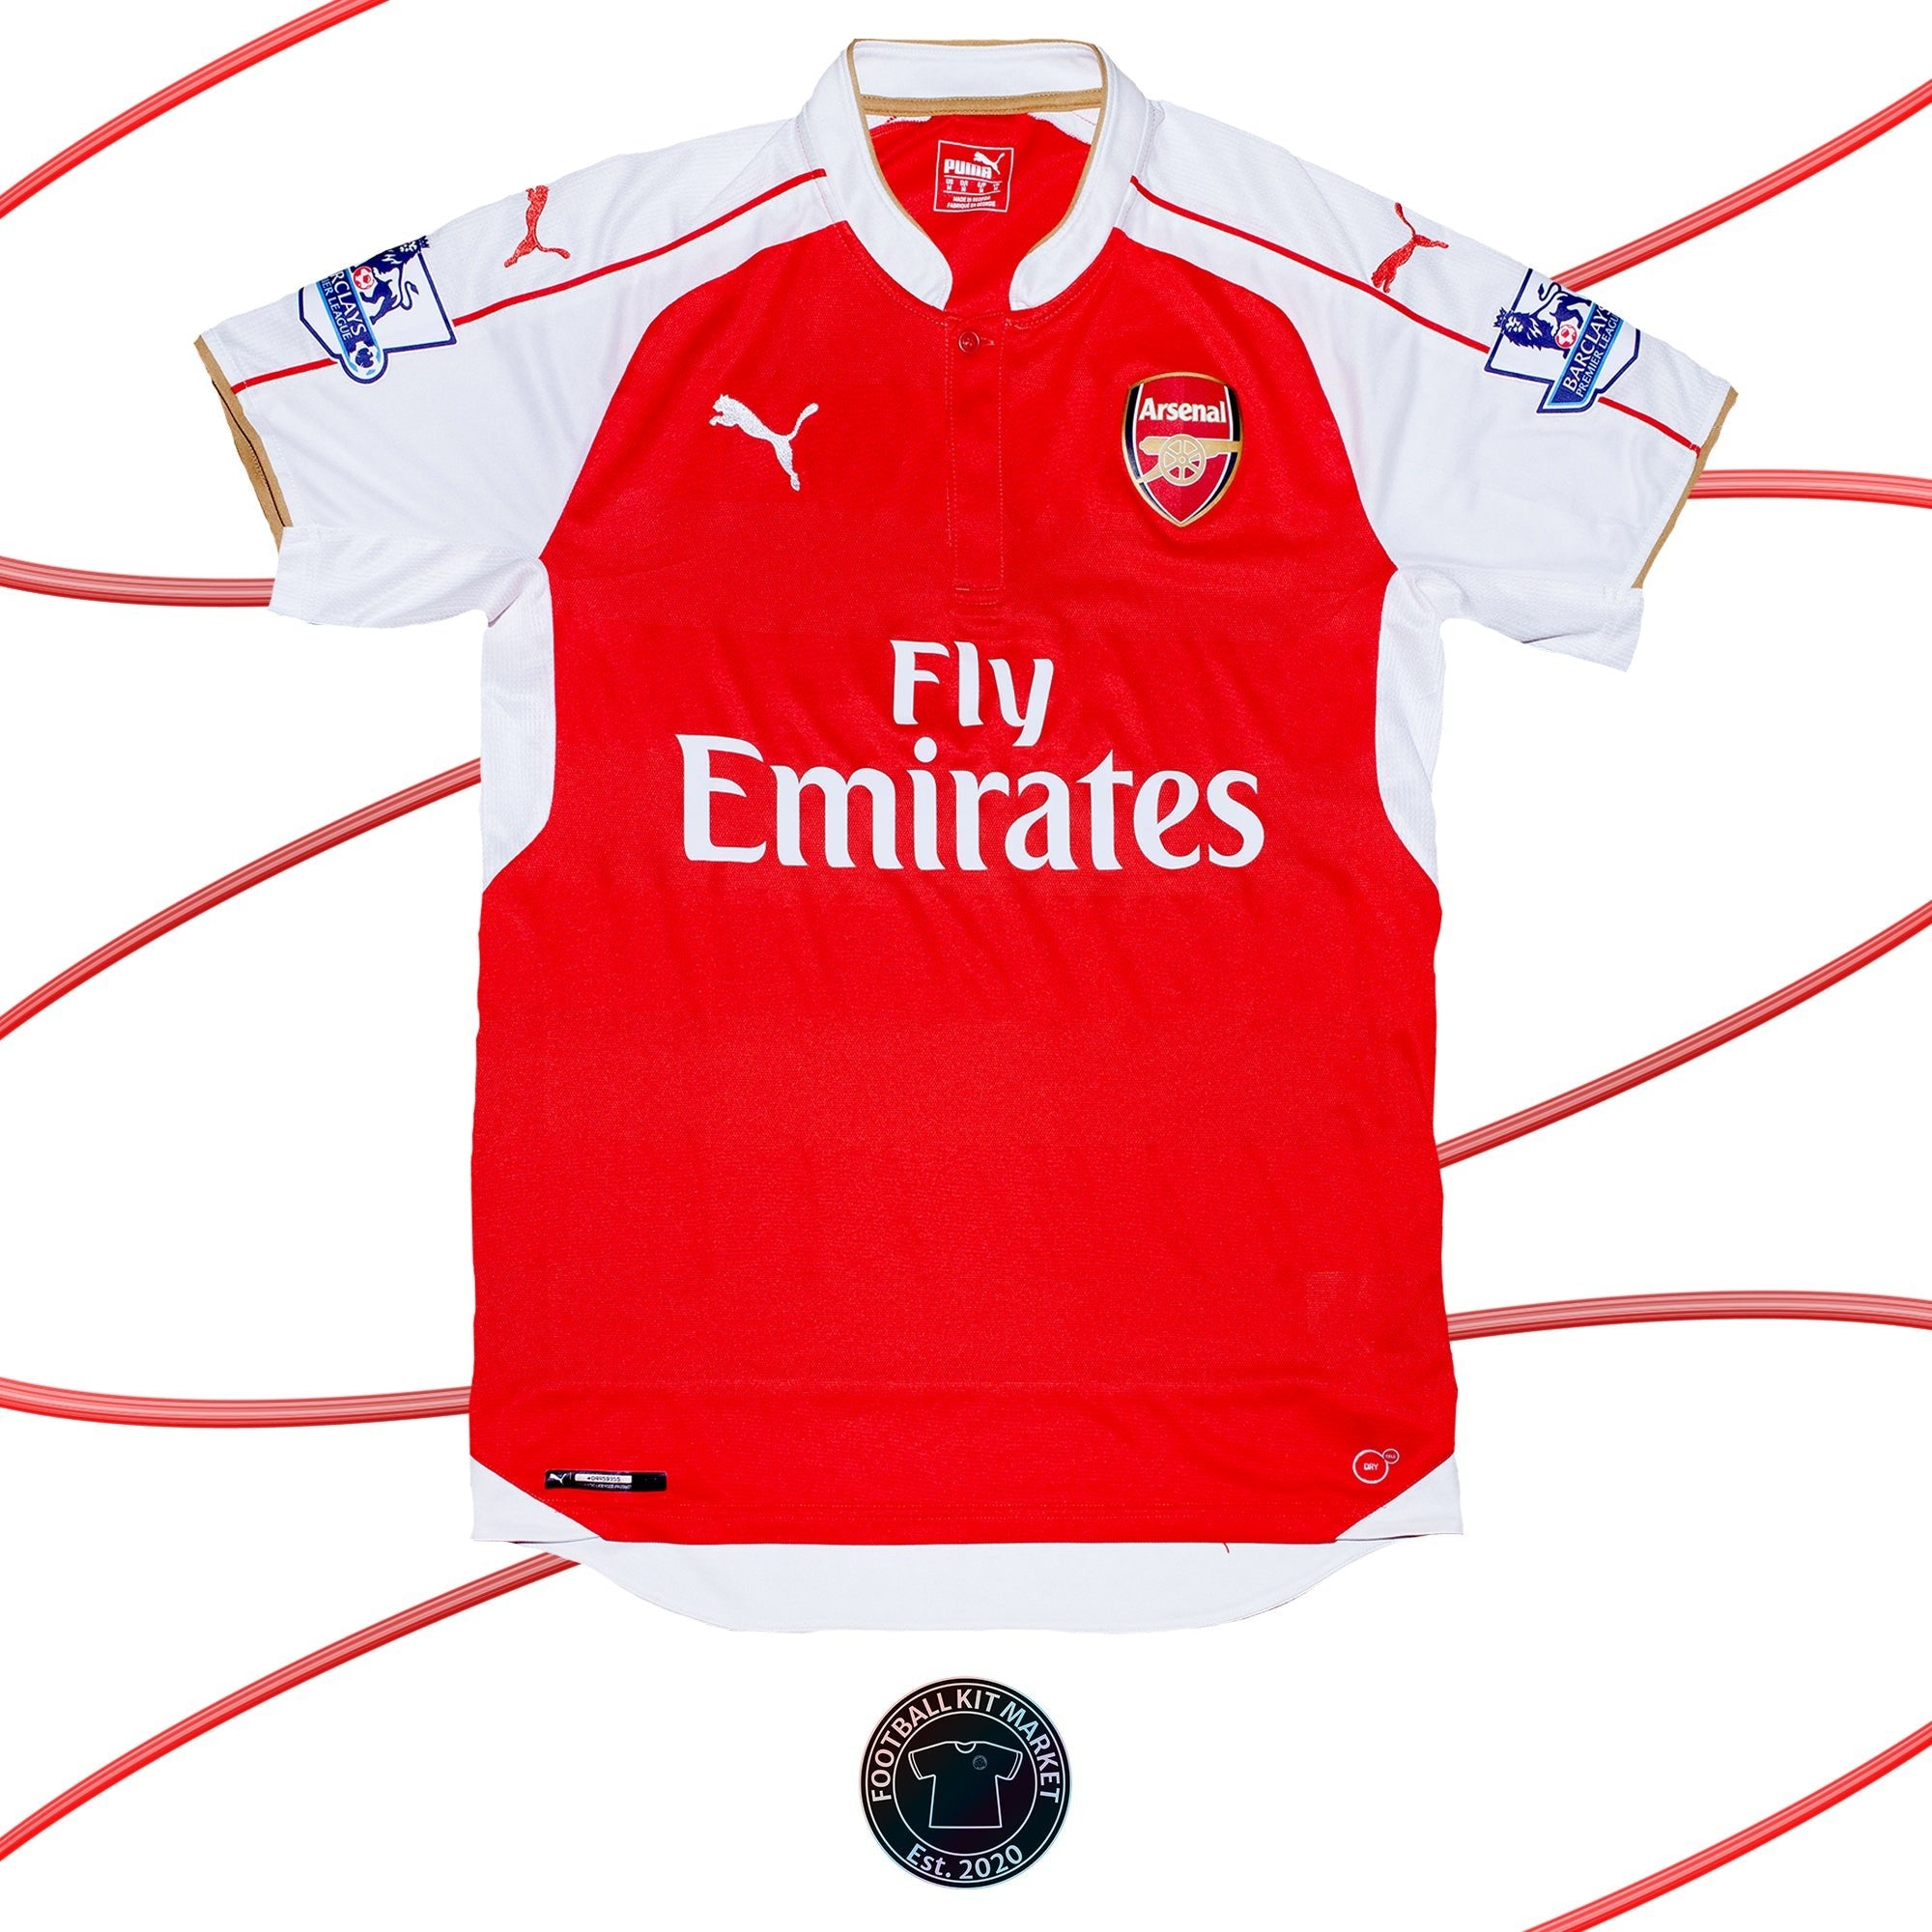 Genuine ARSENAL Home (2015-2016) - PUMA (M) - Product Image from Football Kit Market